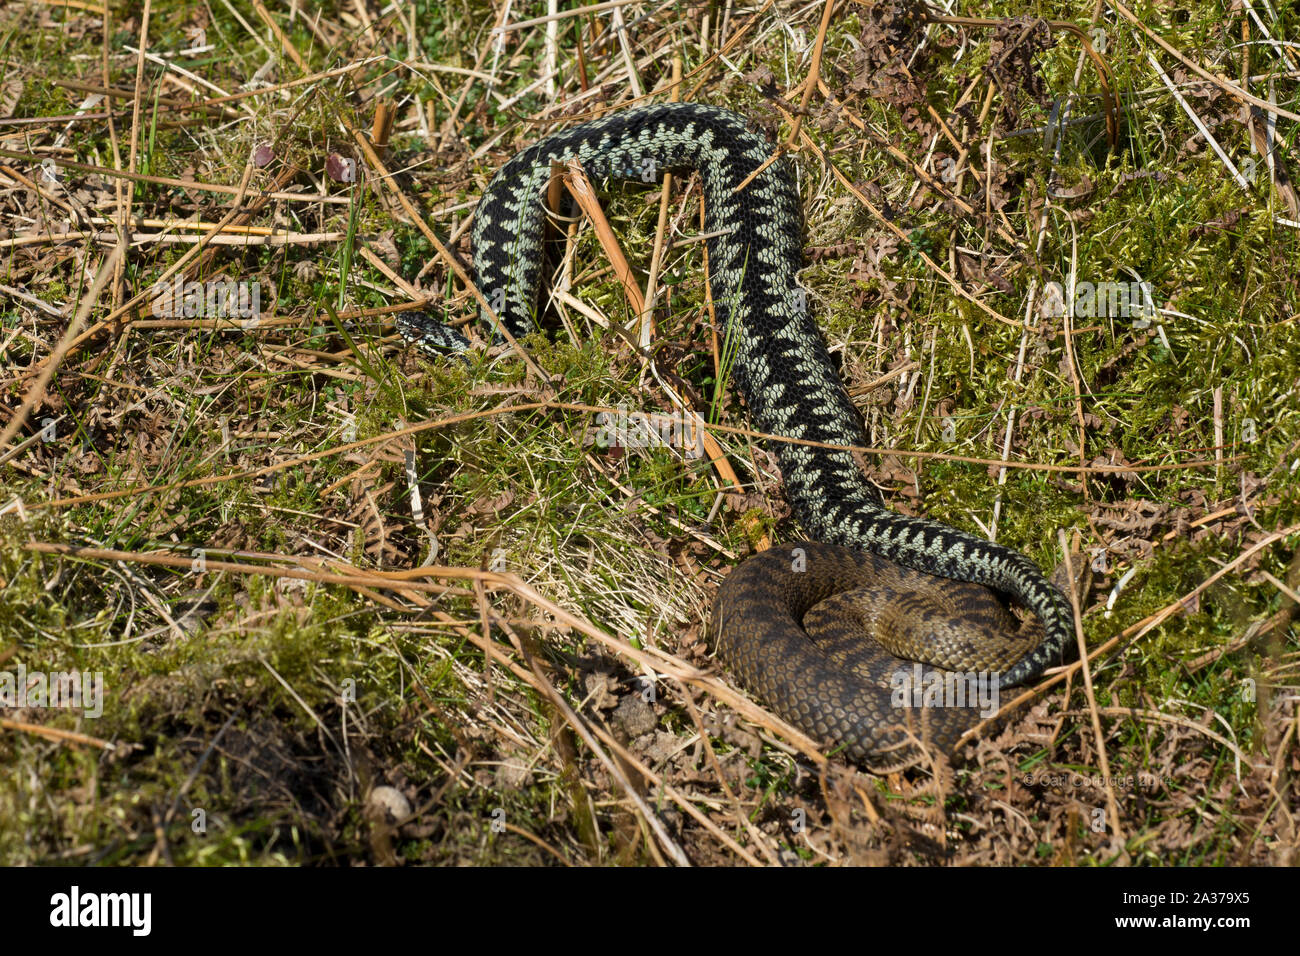 Male and Female Northern Adder (Vipera berus) in courtship behaviour in the Northern Pennine Mountains of England. Stock Photo